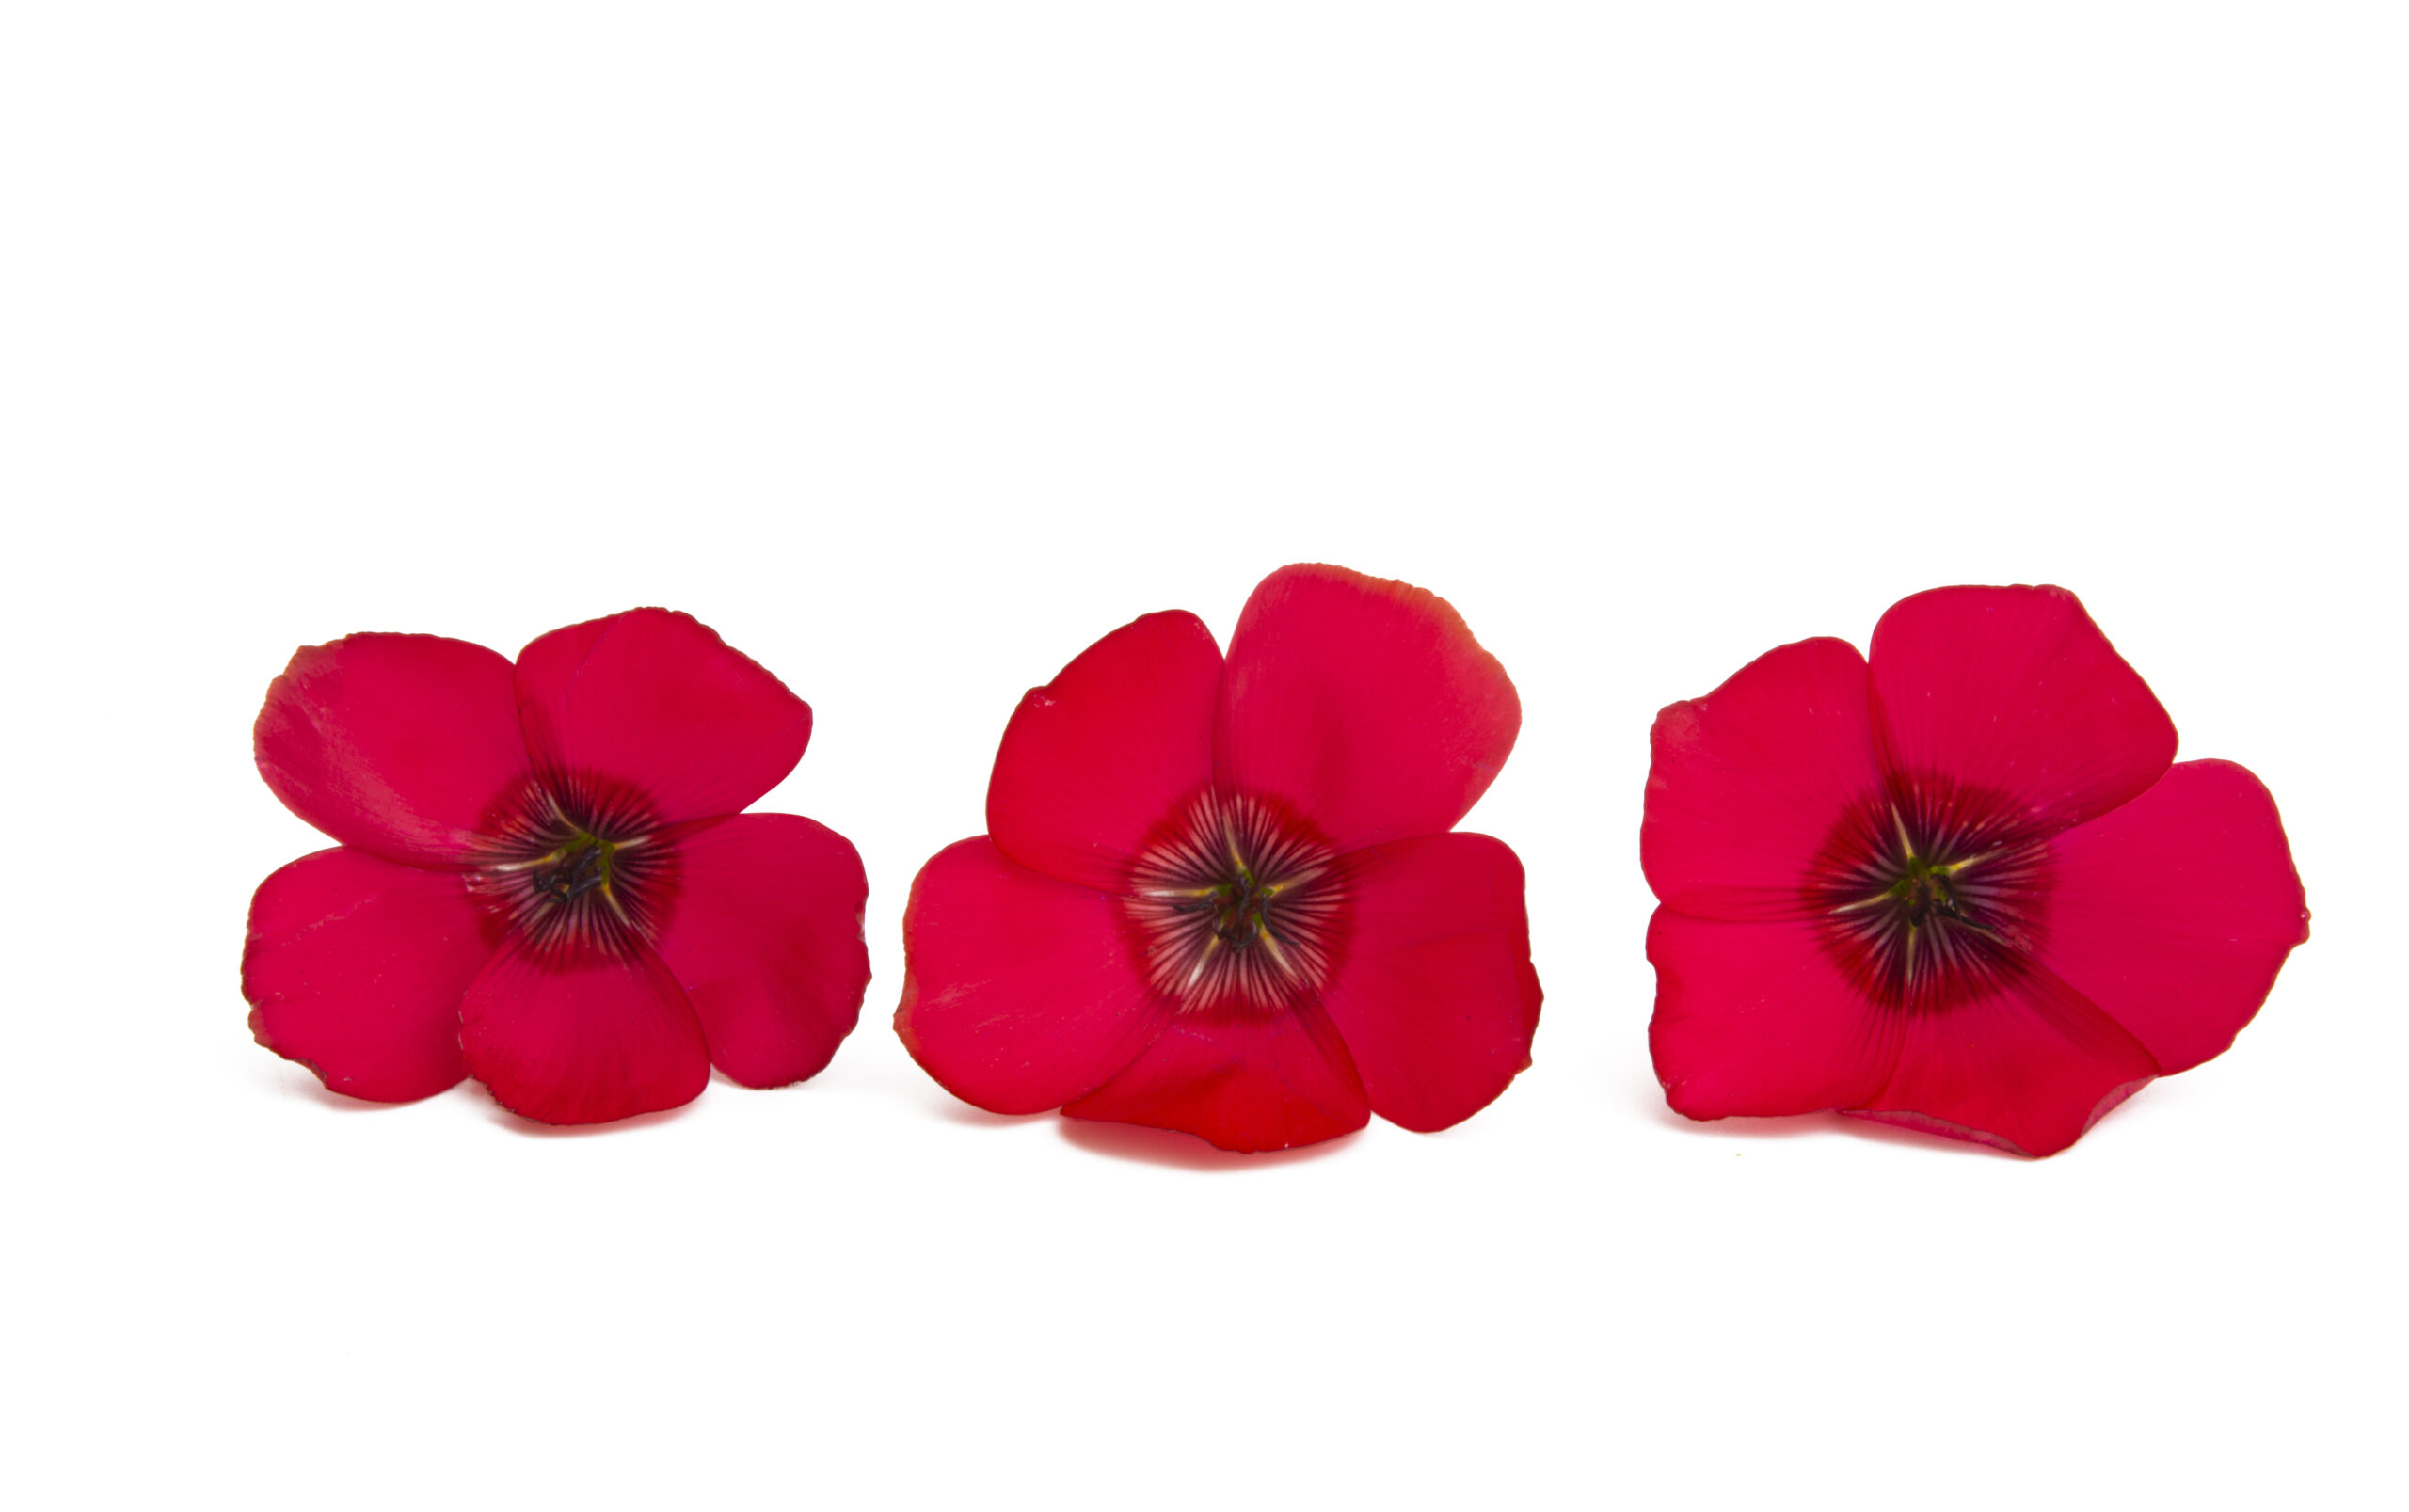 red flax flower isolated